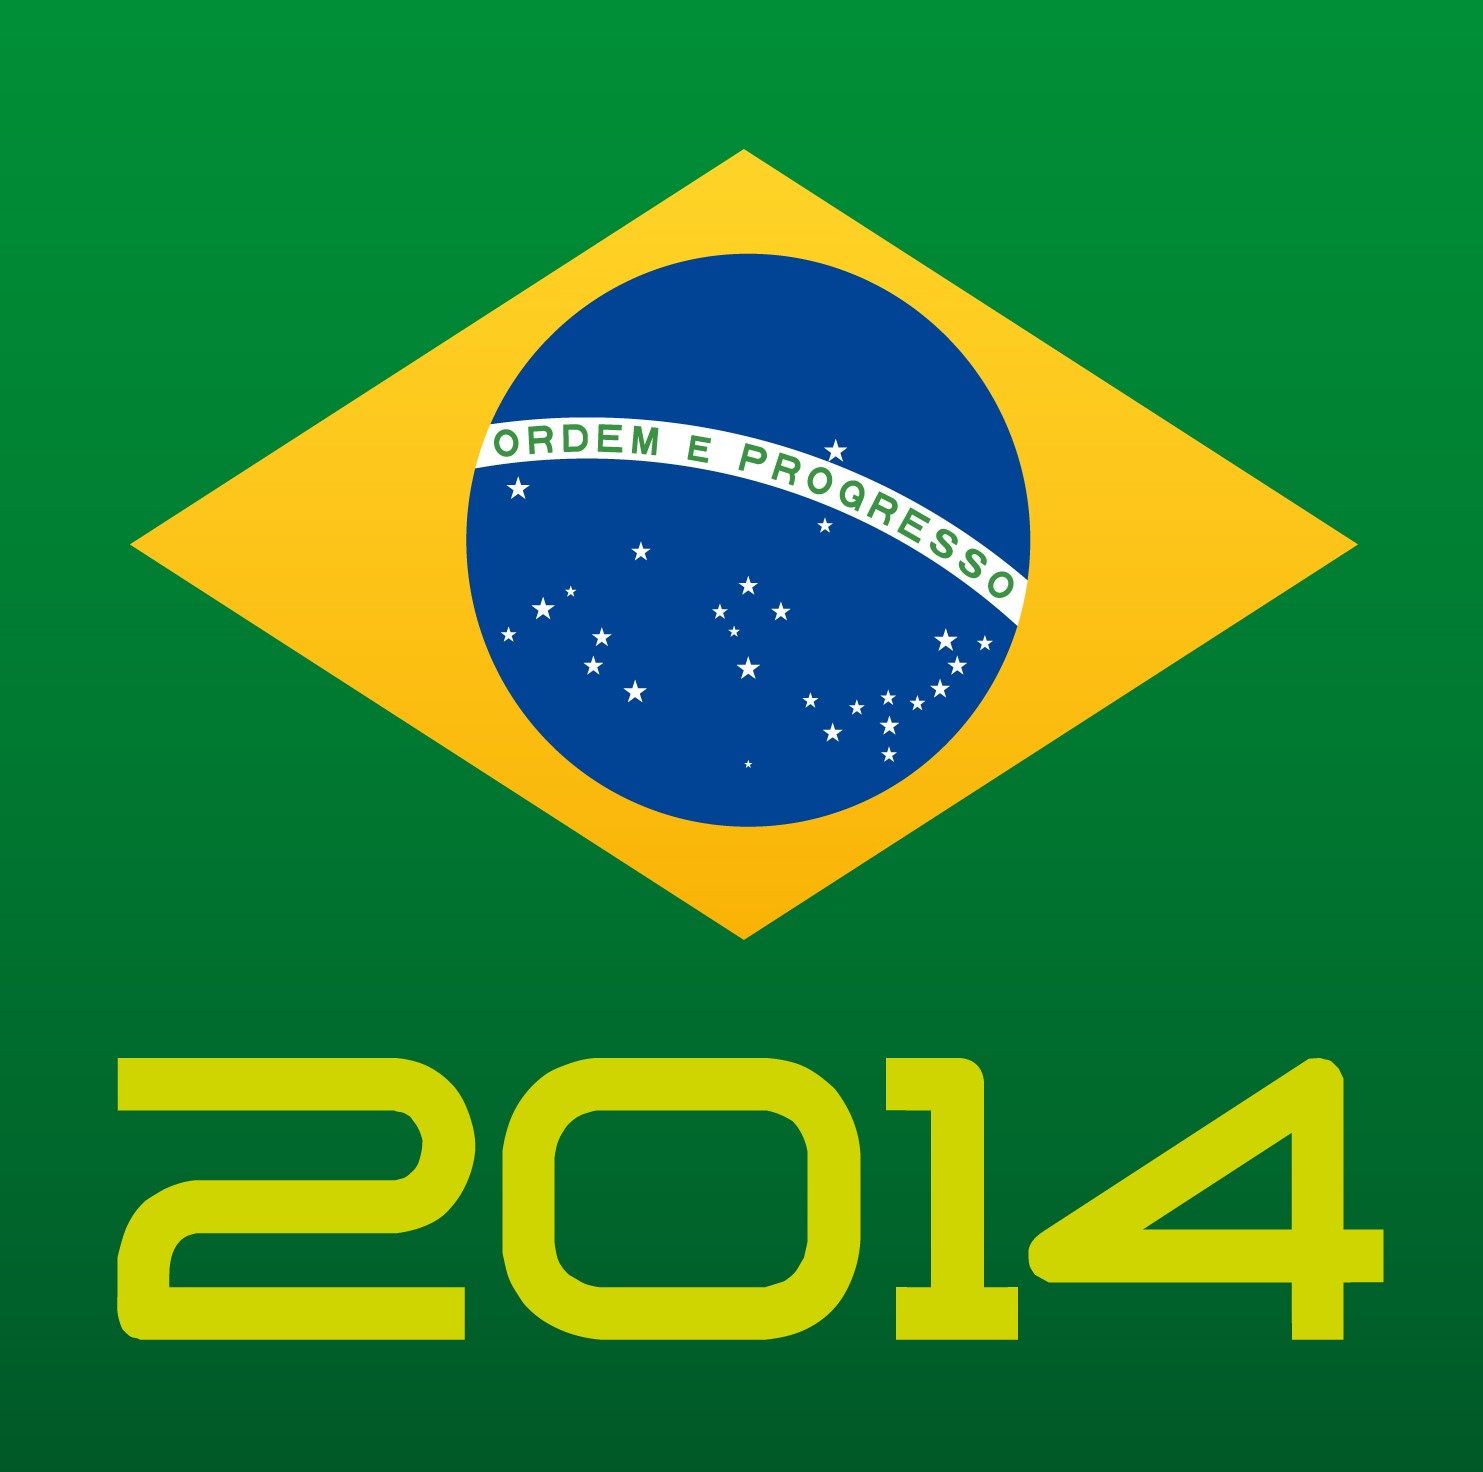 Flag of Brazil 2014 World Cup - High Definition, High Resolution HD ...